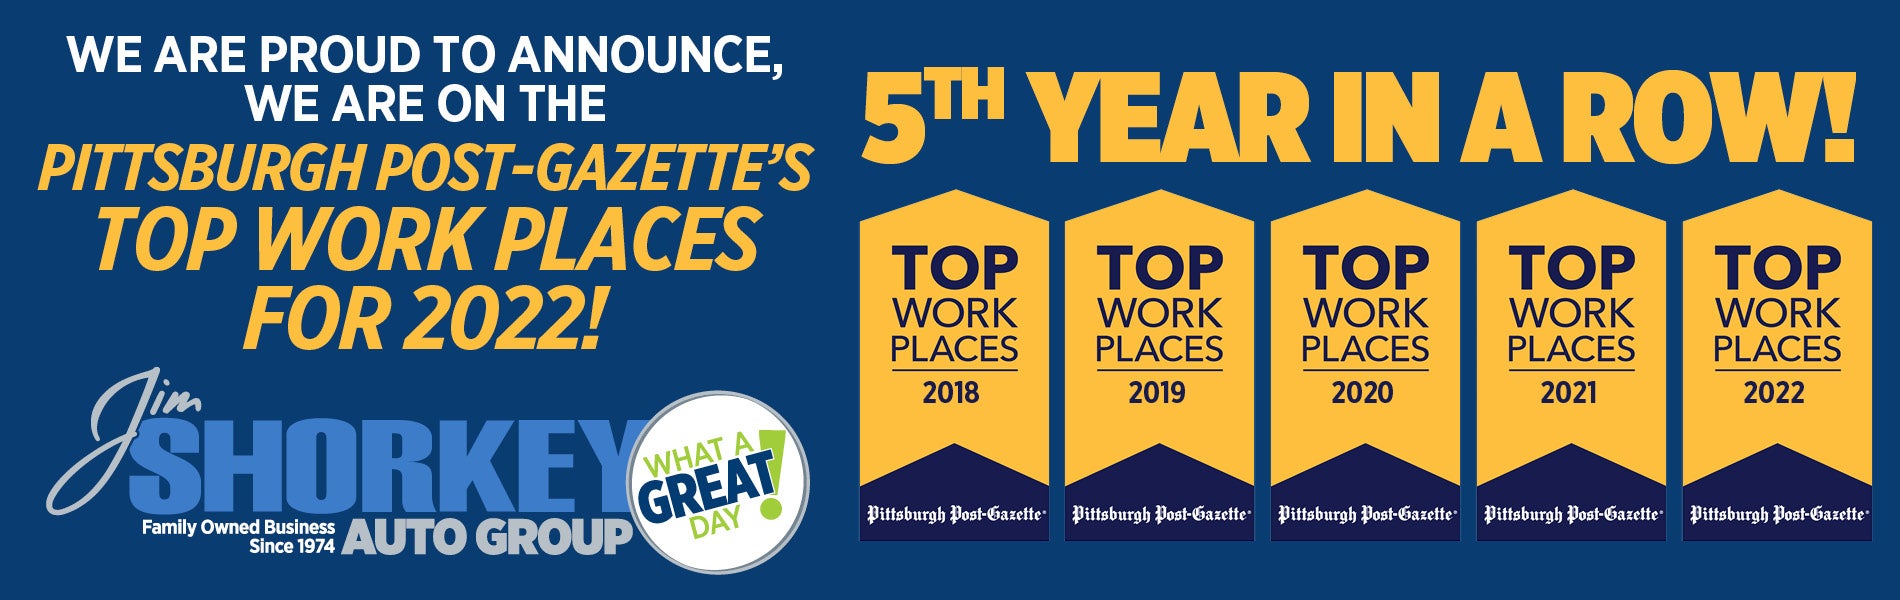 Pittsburgh Post-Gazette's Top Work Places 2022